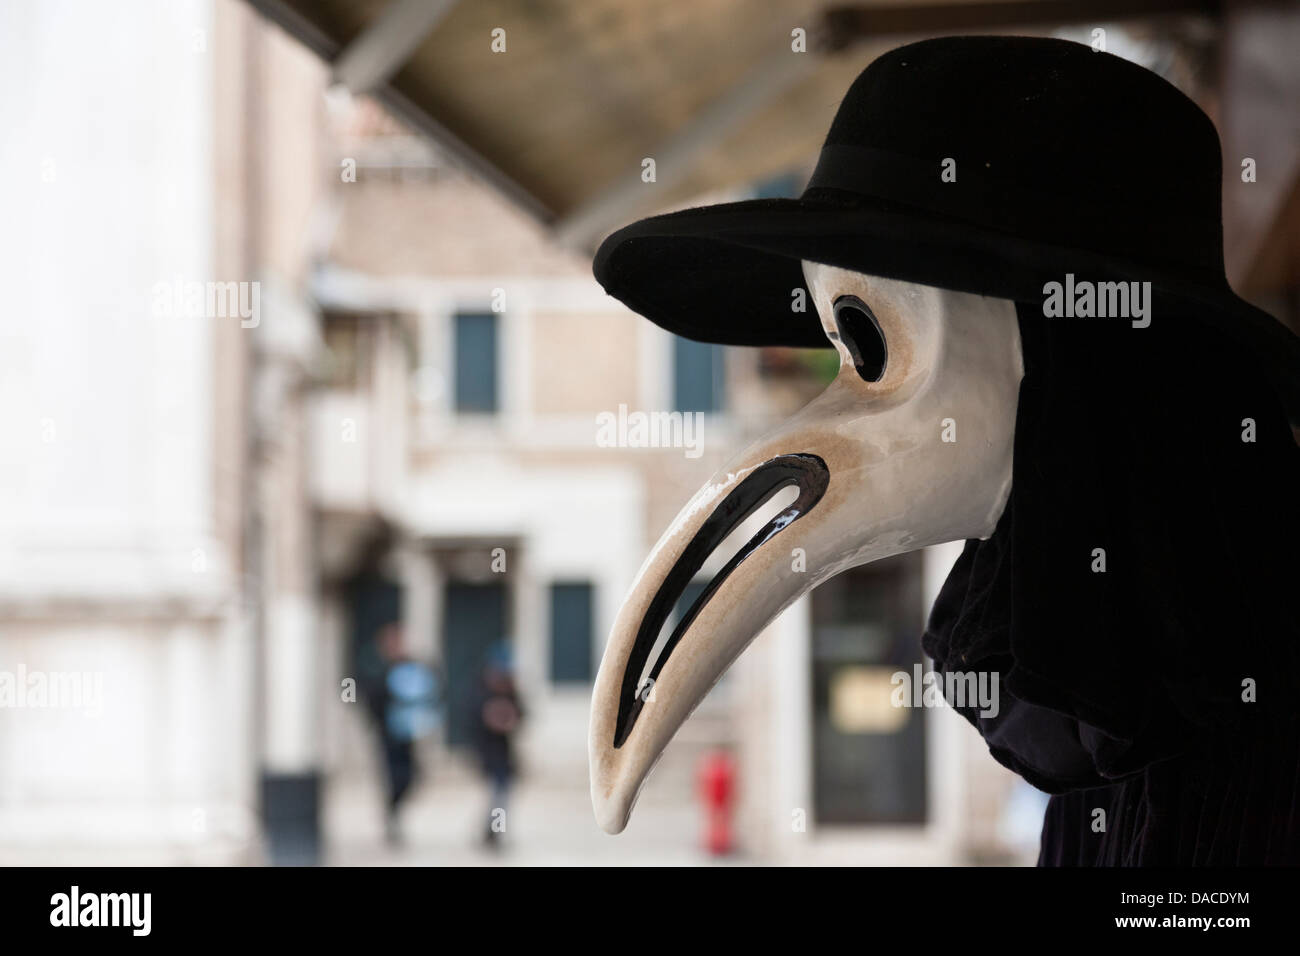 Carneval Mask on display, Venice, Italy Stock Photo